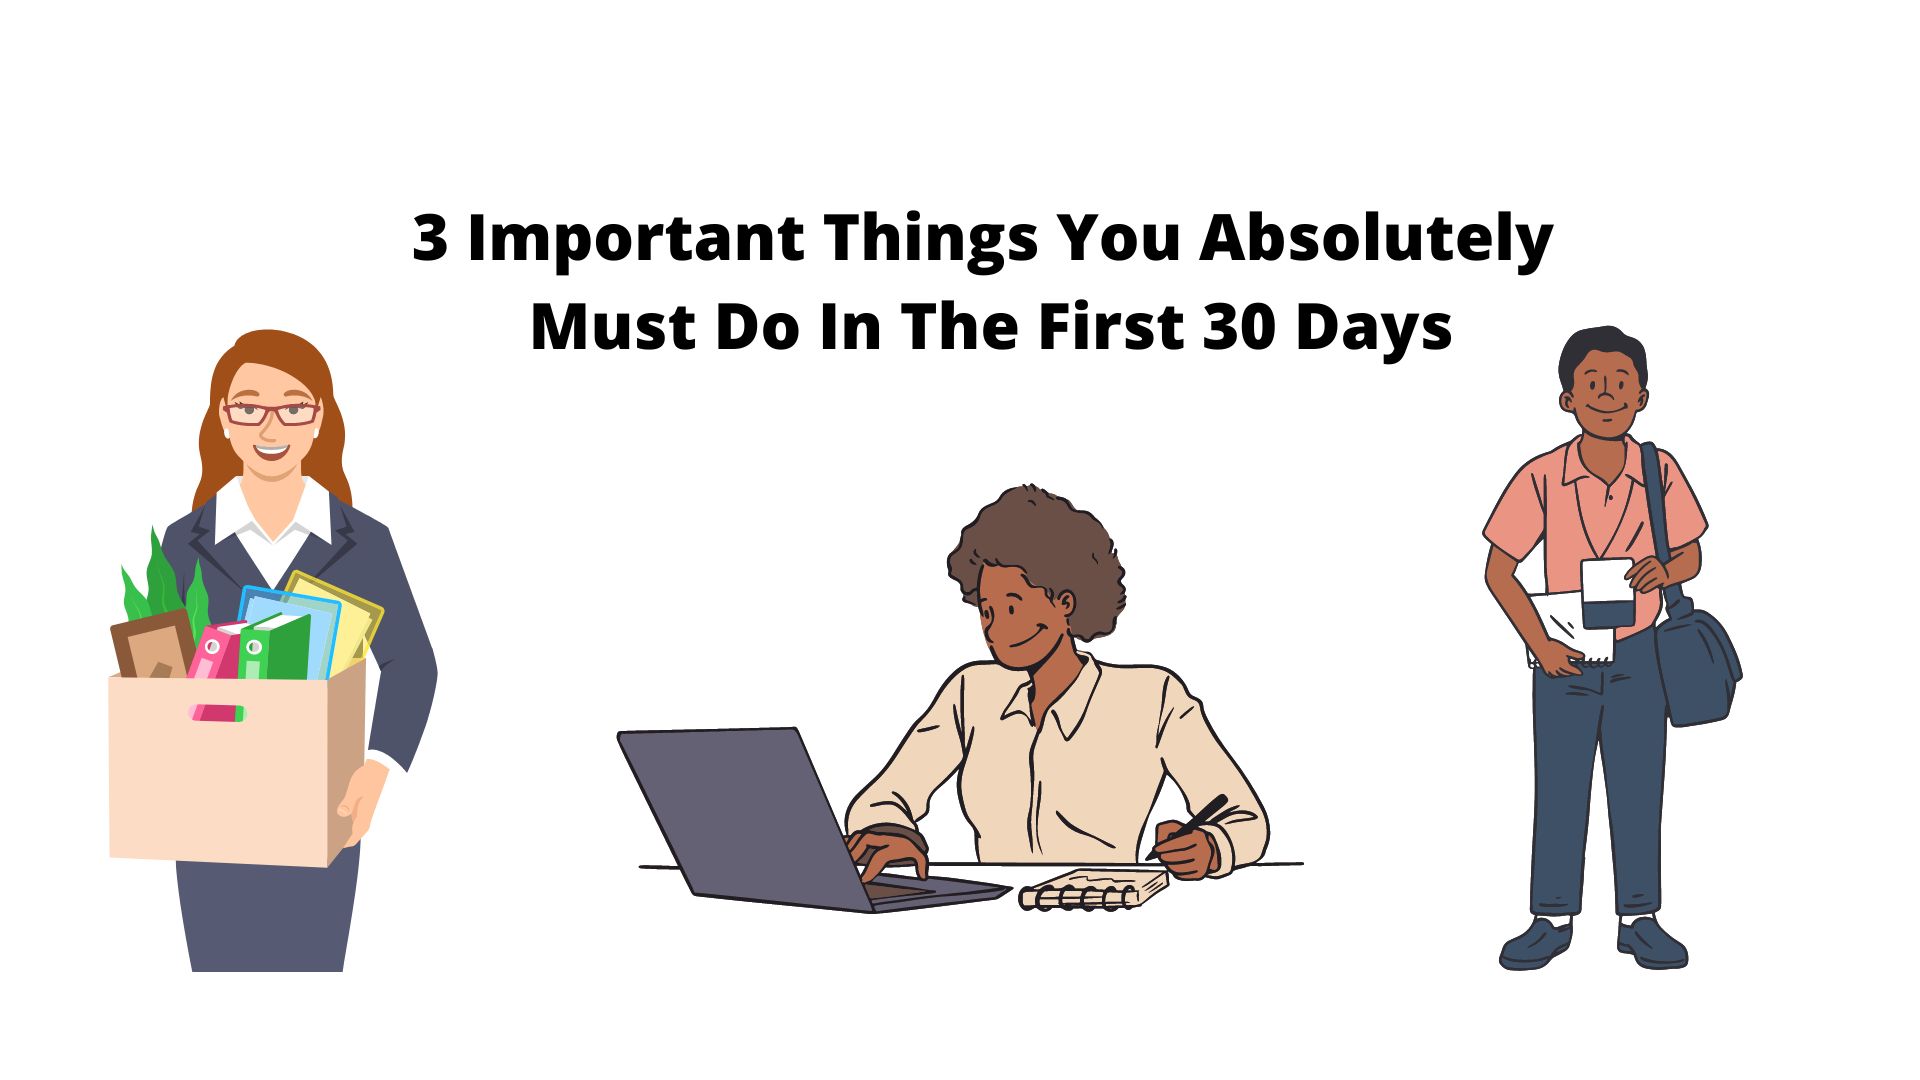 New CIOs, Take Note: 3 Important Things You Absolutely Must Do In The First 30 Days of Job